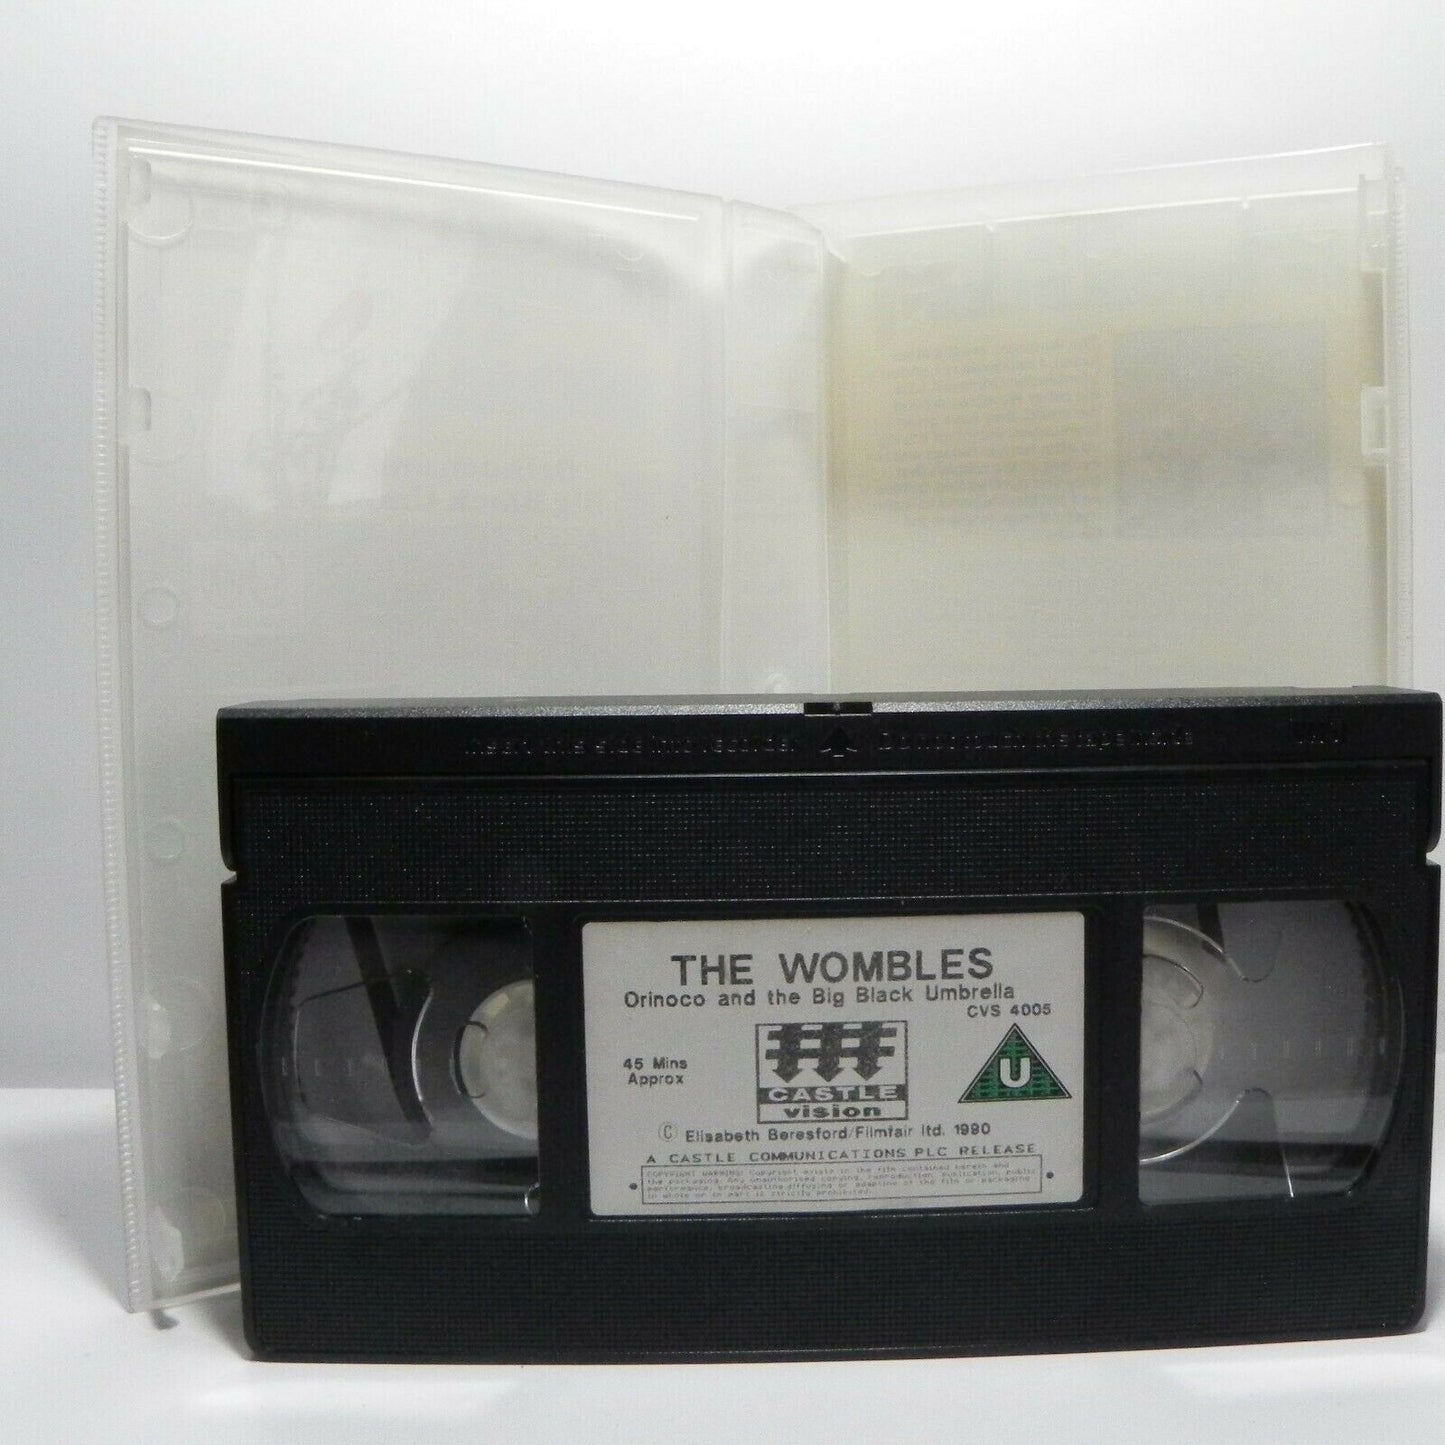 The Wombles: Orinoco And The Big Black Umbrella - Classic Animation - Kids - VHS-